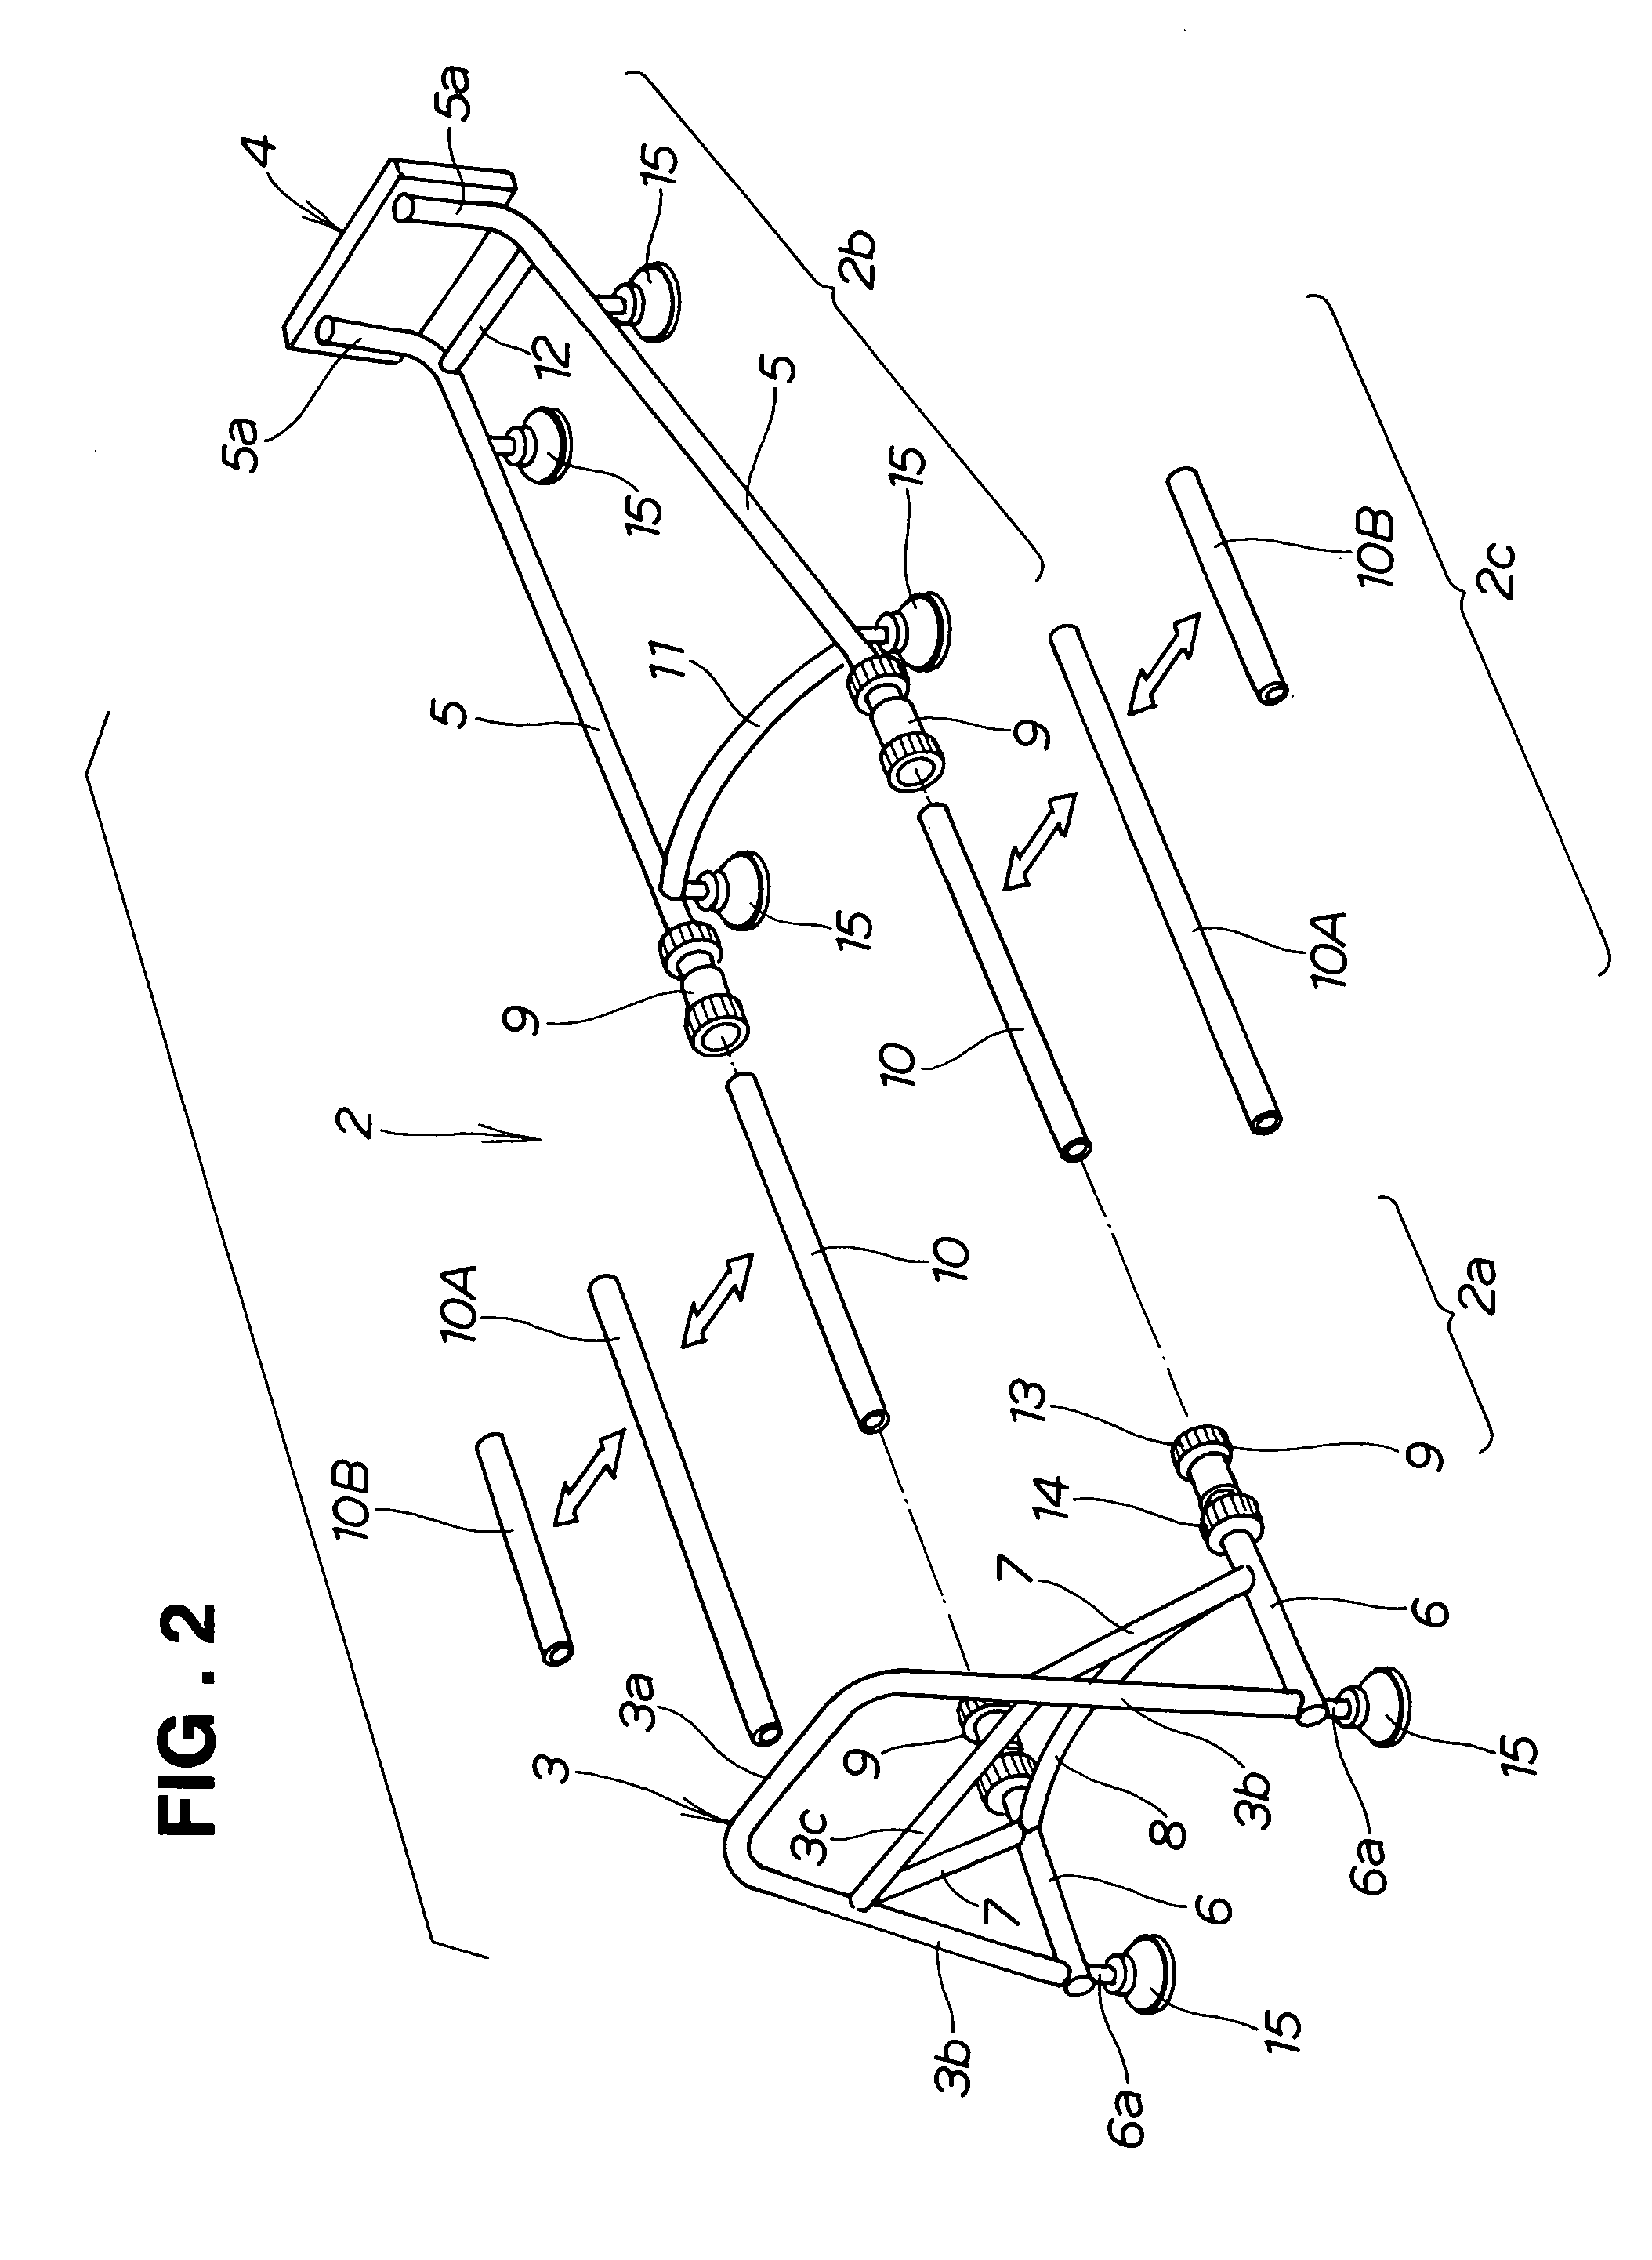 Marine propulsion attachment with removable frame structure for non-self-propelled marine vehicles